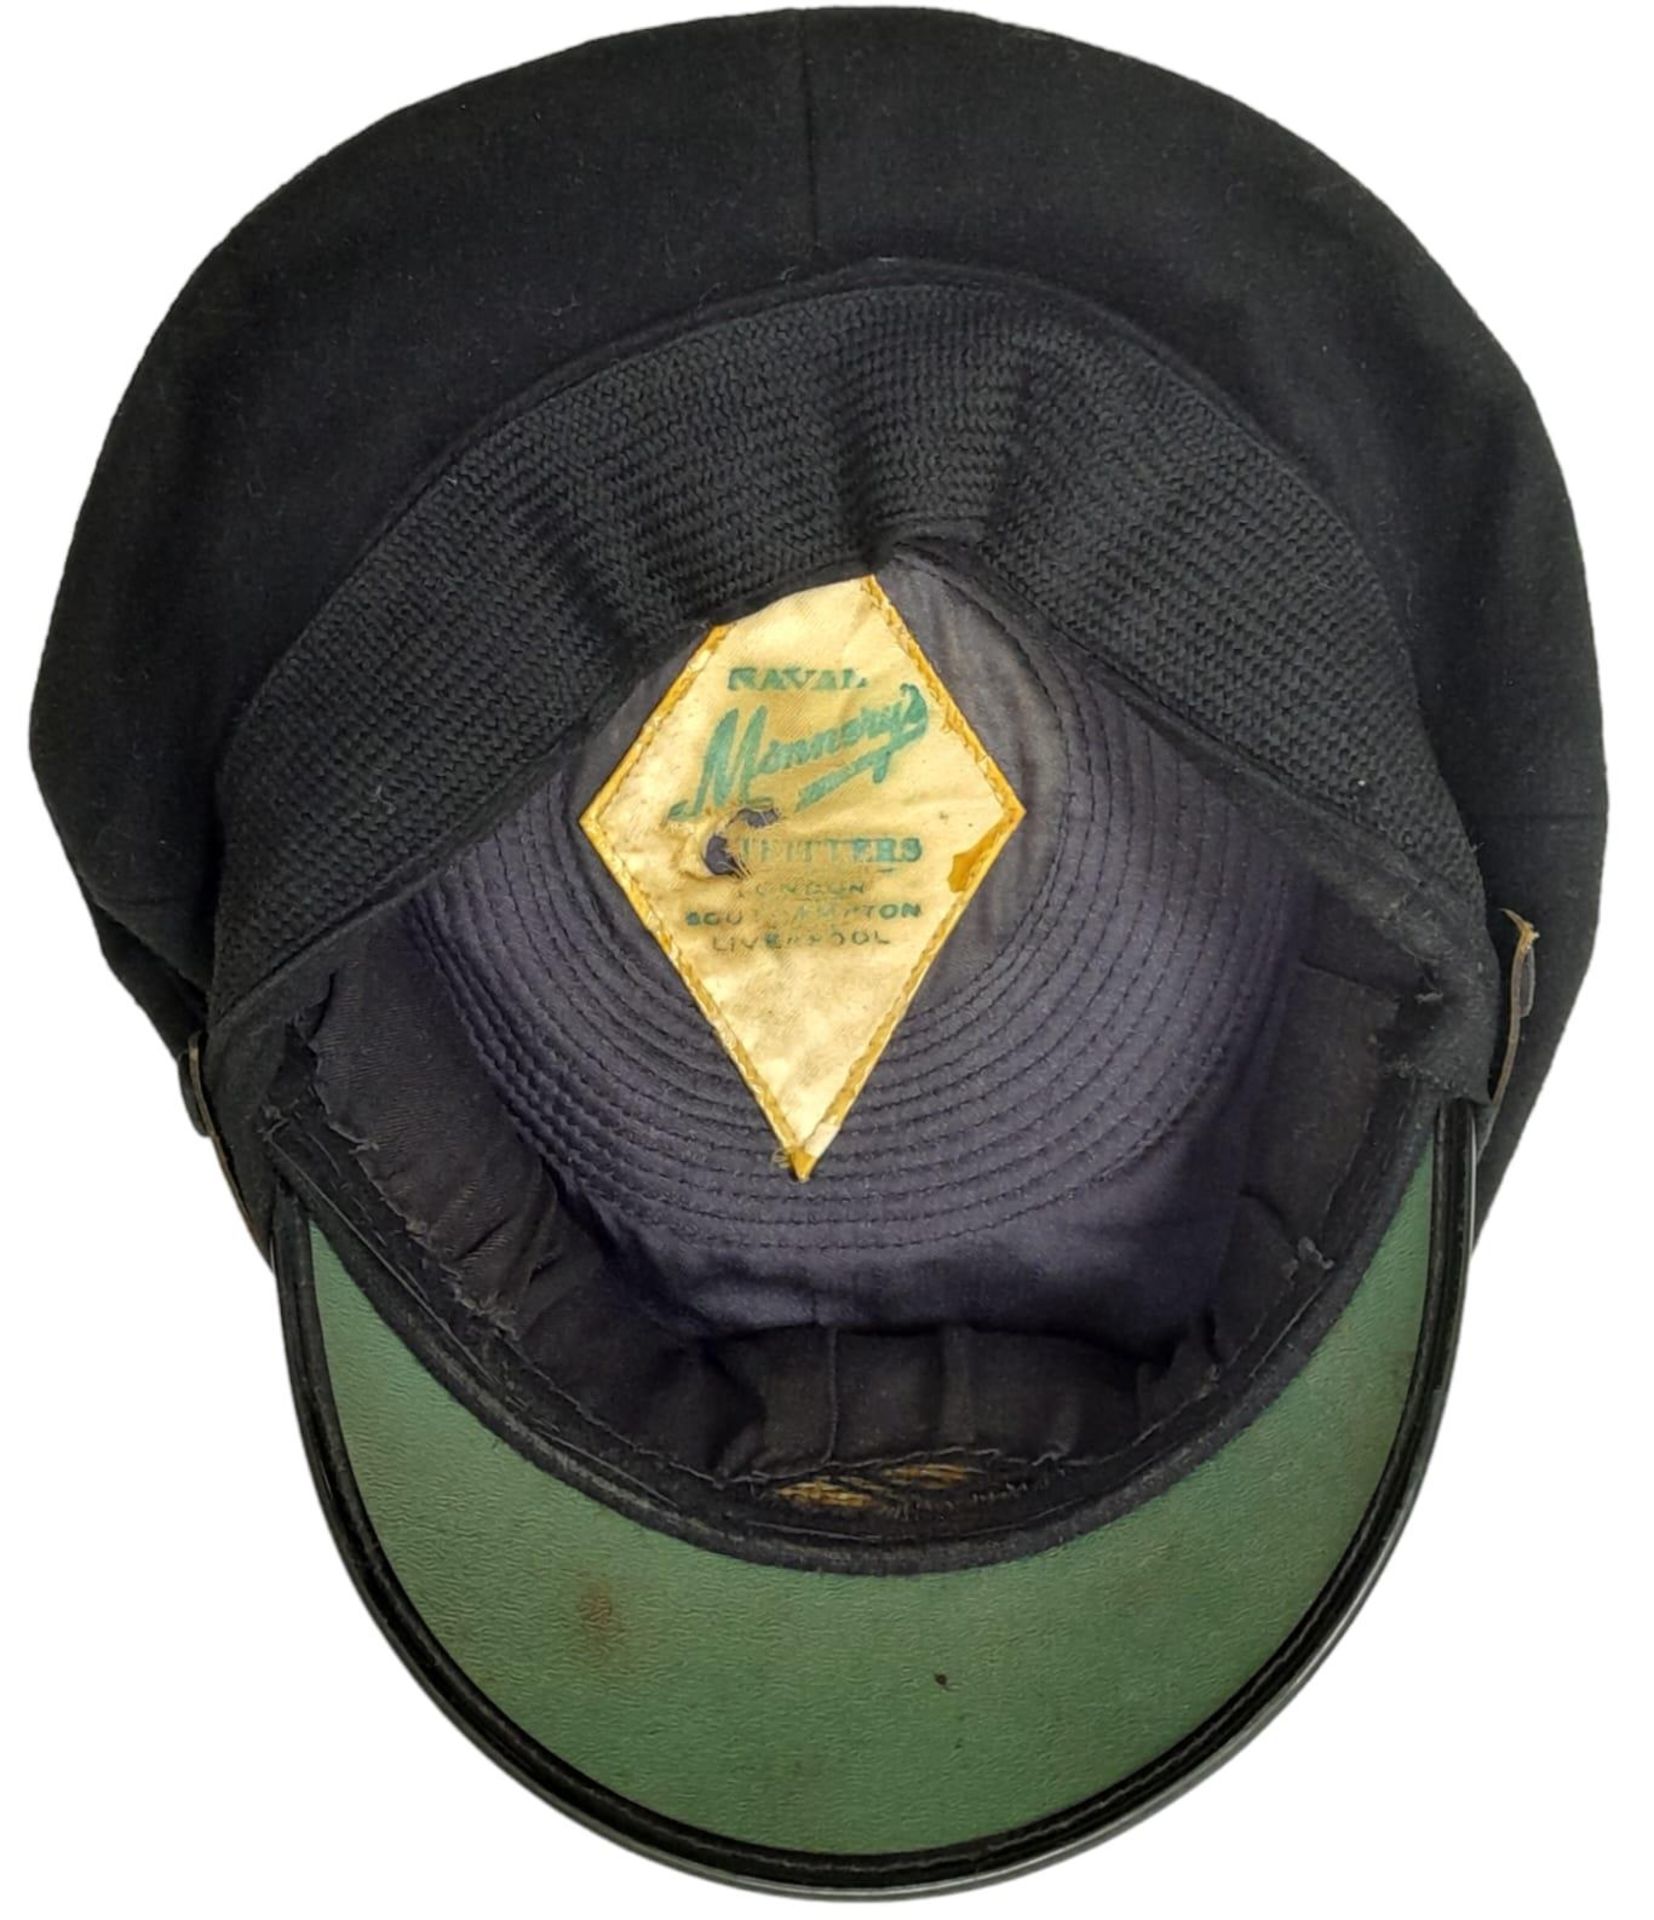 WW1 British Royal Naval Air Service Petty Officers Cap. - Image 4 of 6